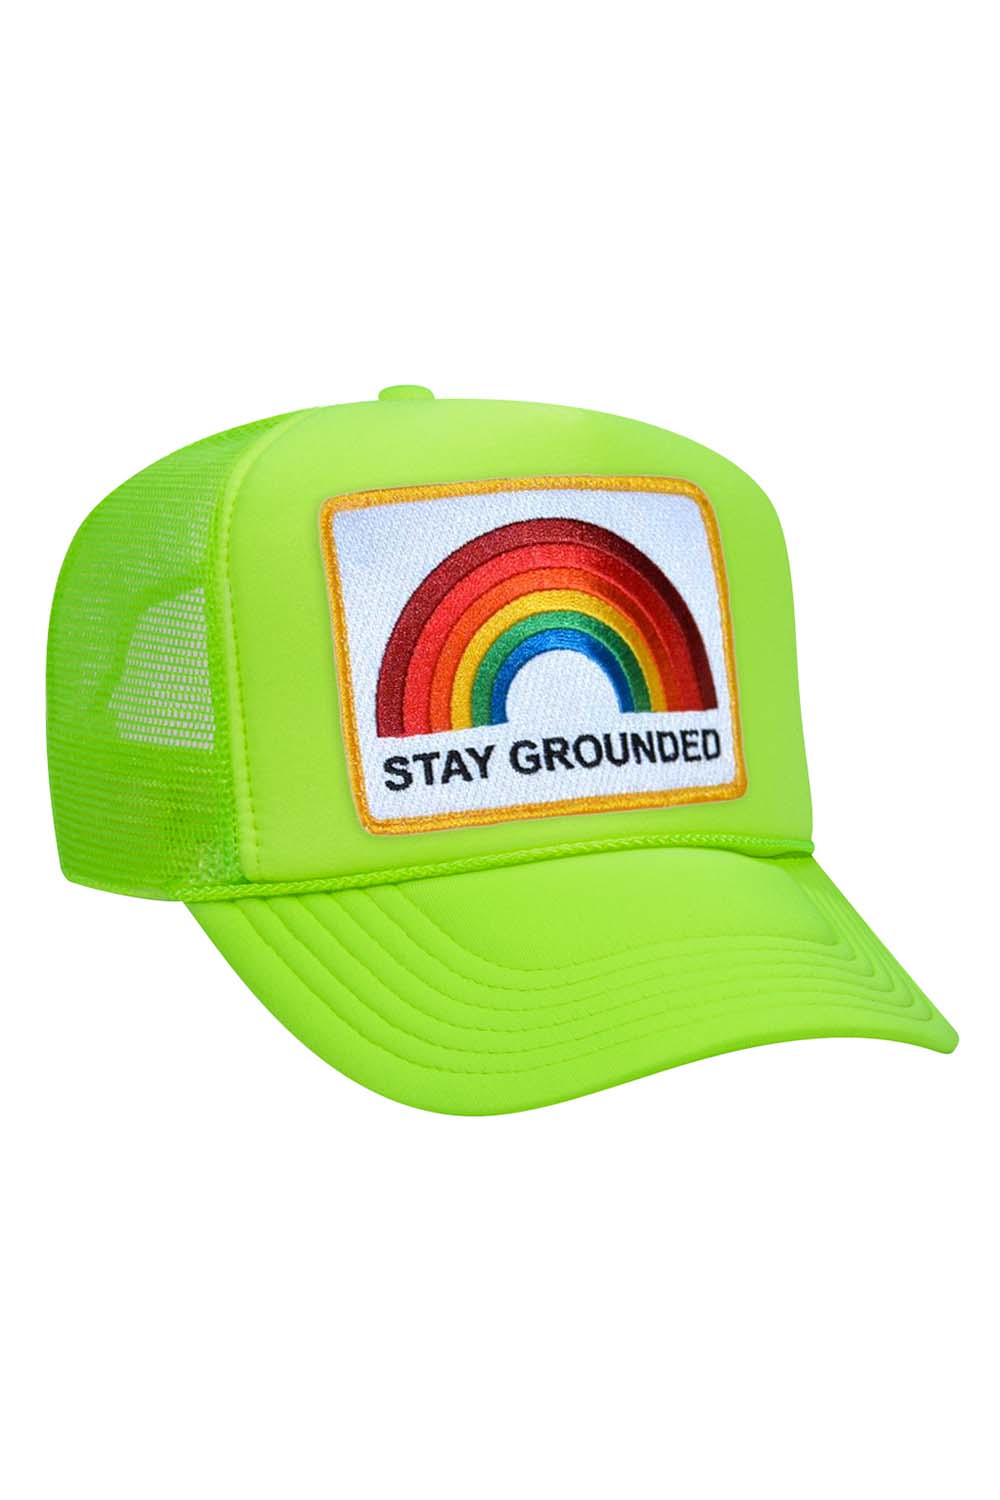 STAY GROUNDED TRUCKER HAT - Aviator Nation